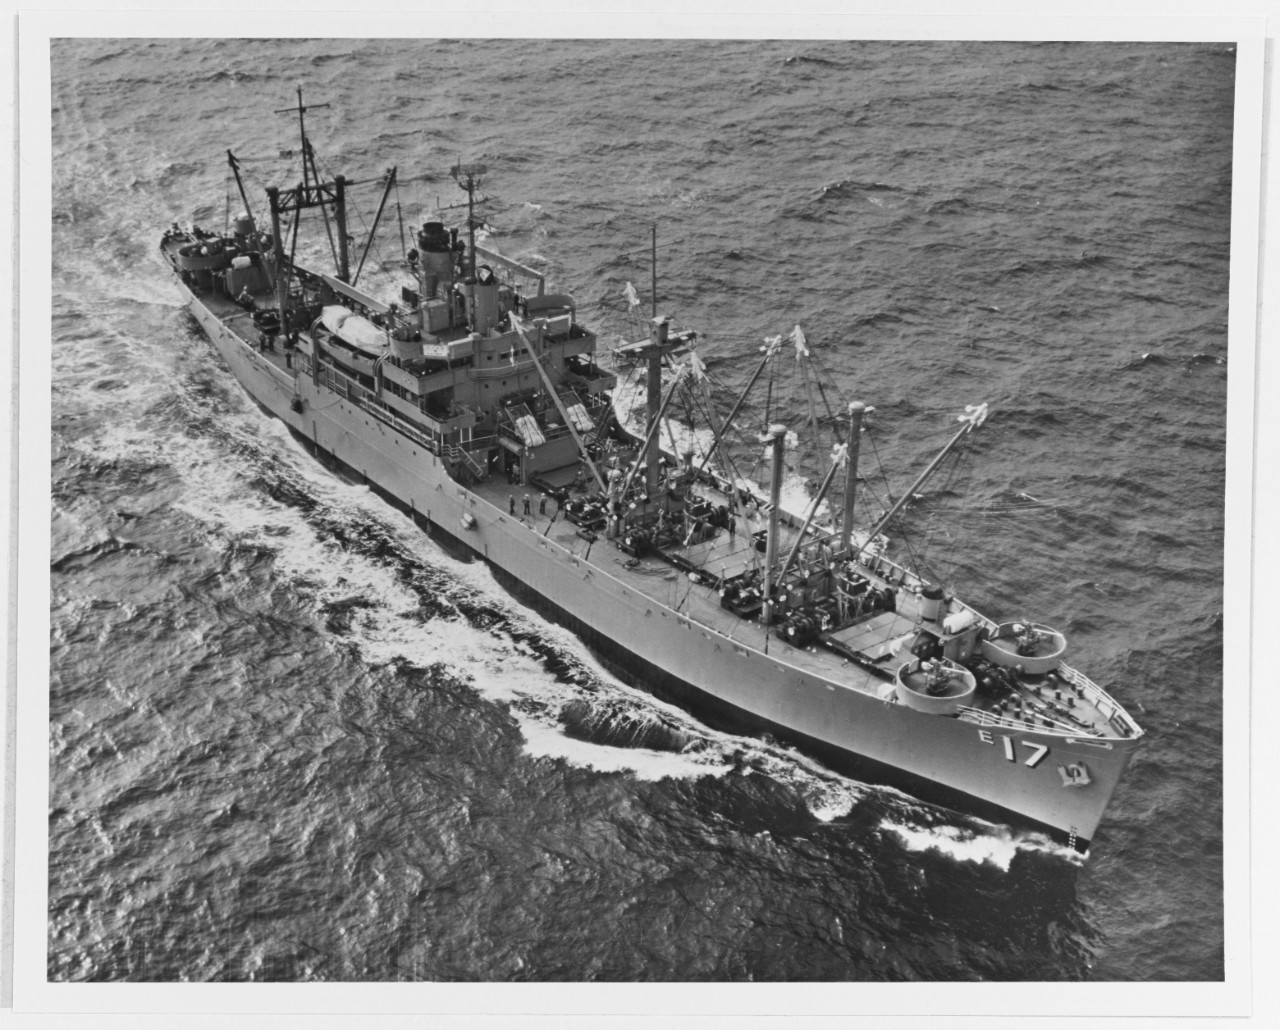 USS GREAT SITKIN (AE-17)